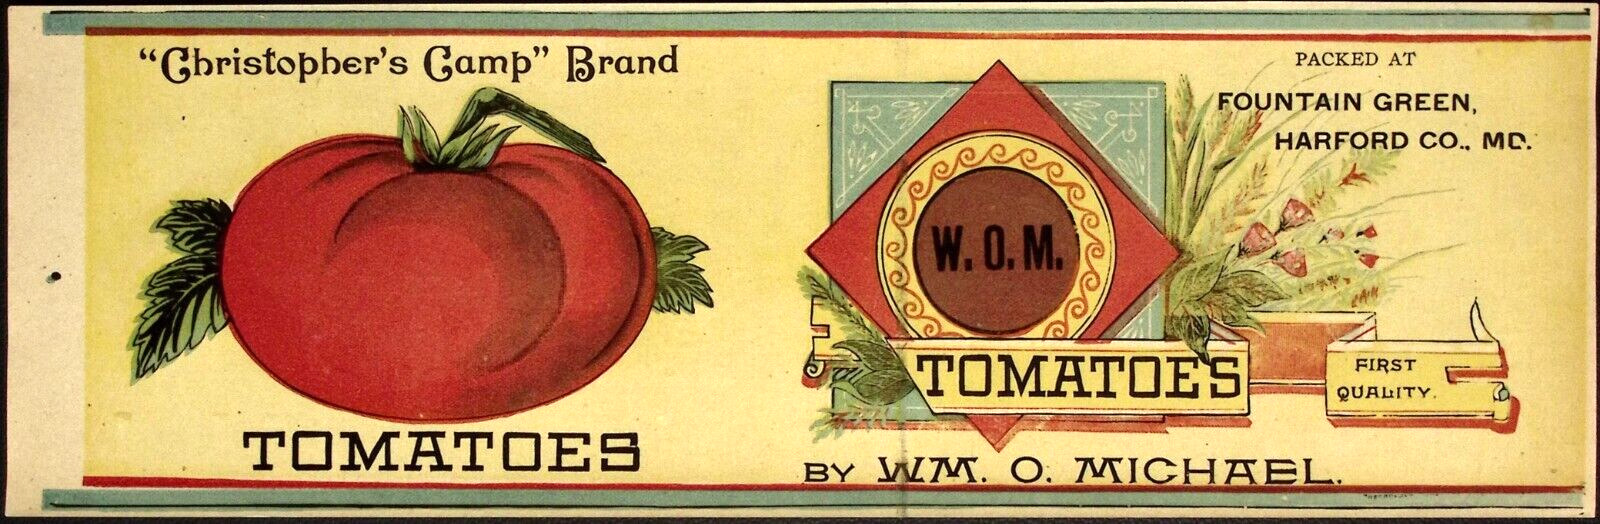 c1900 Christopher\'s Camp Brand Tomatoes Can Label Fountain Green Harford Co MD